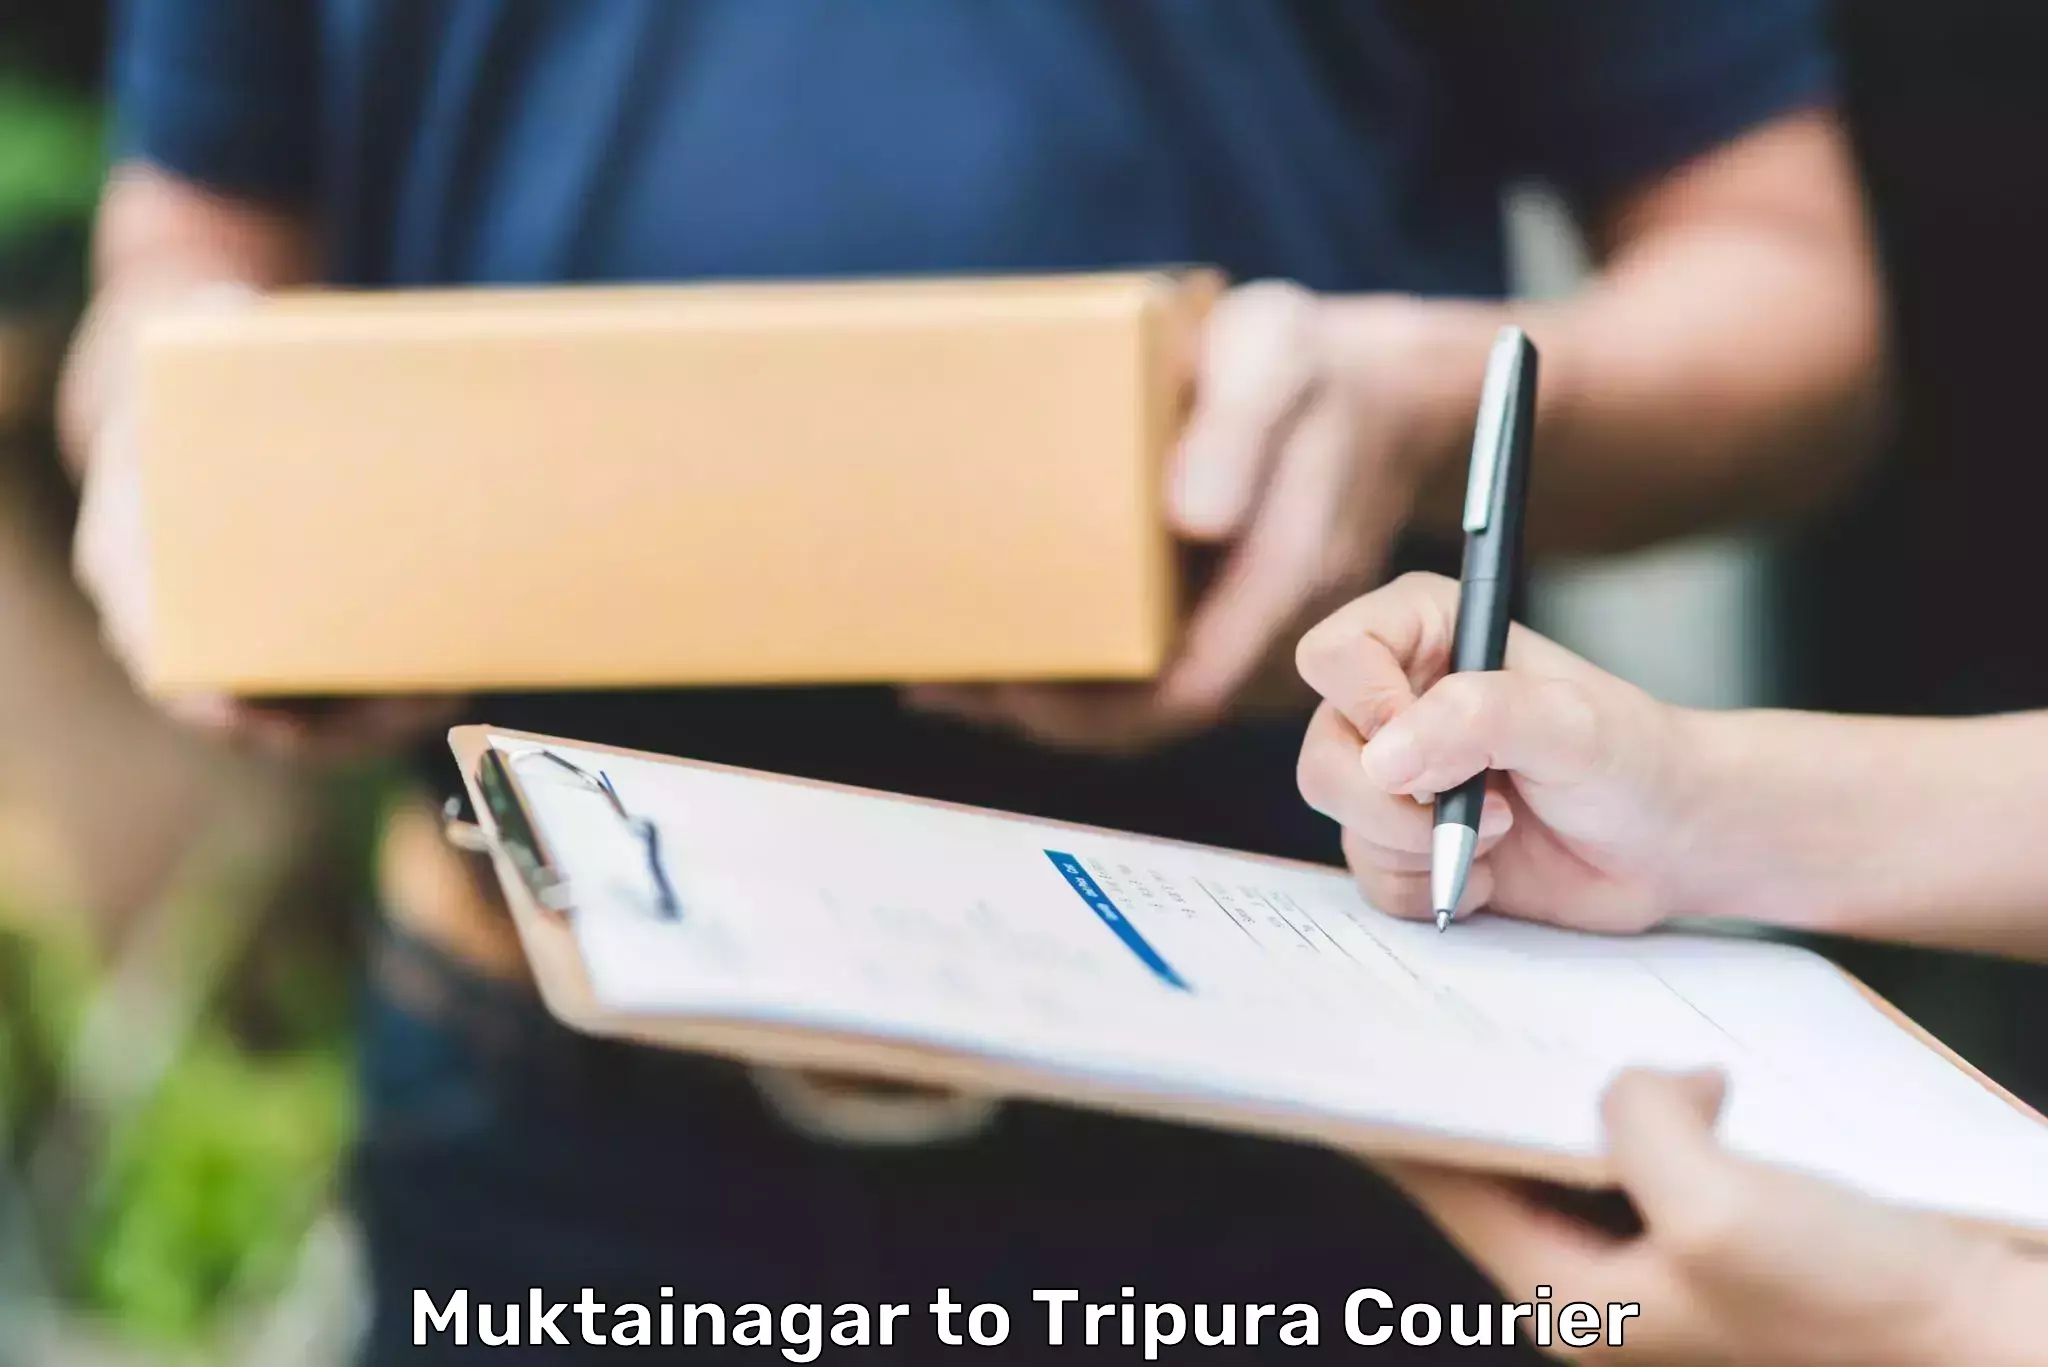 Sustainable courier practices Muktainagar to Udaipur Tripura